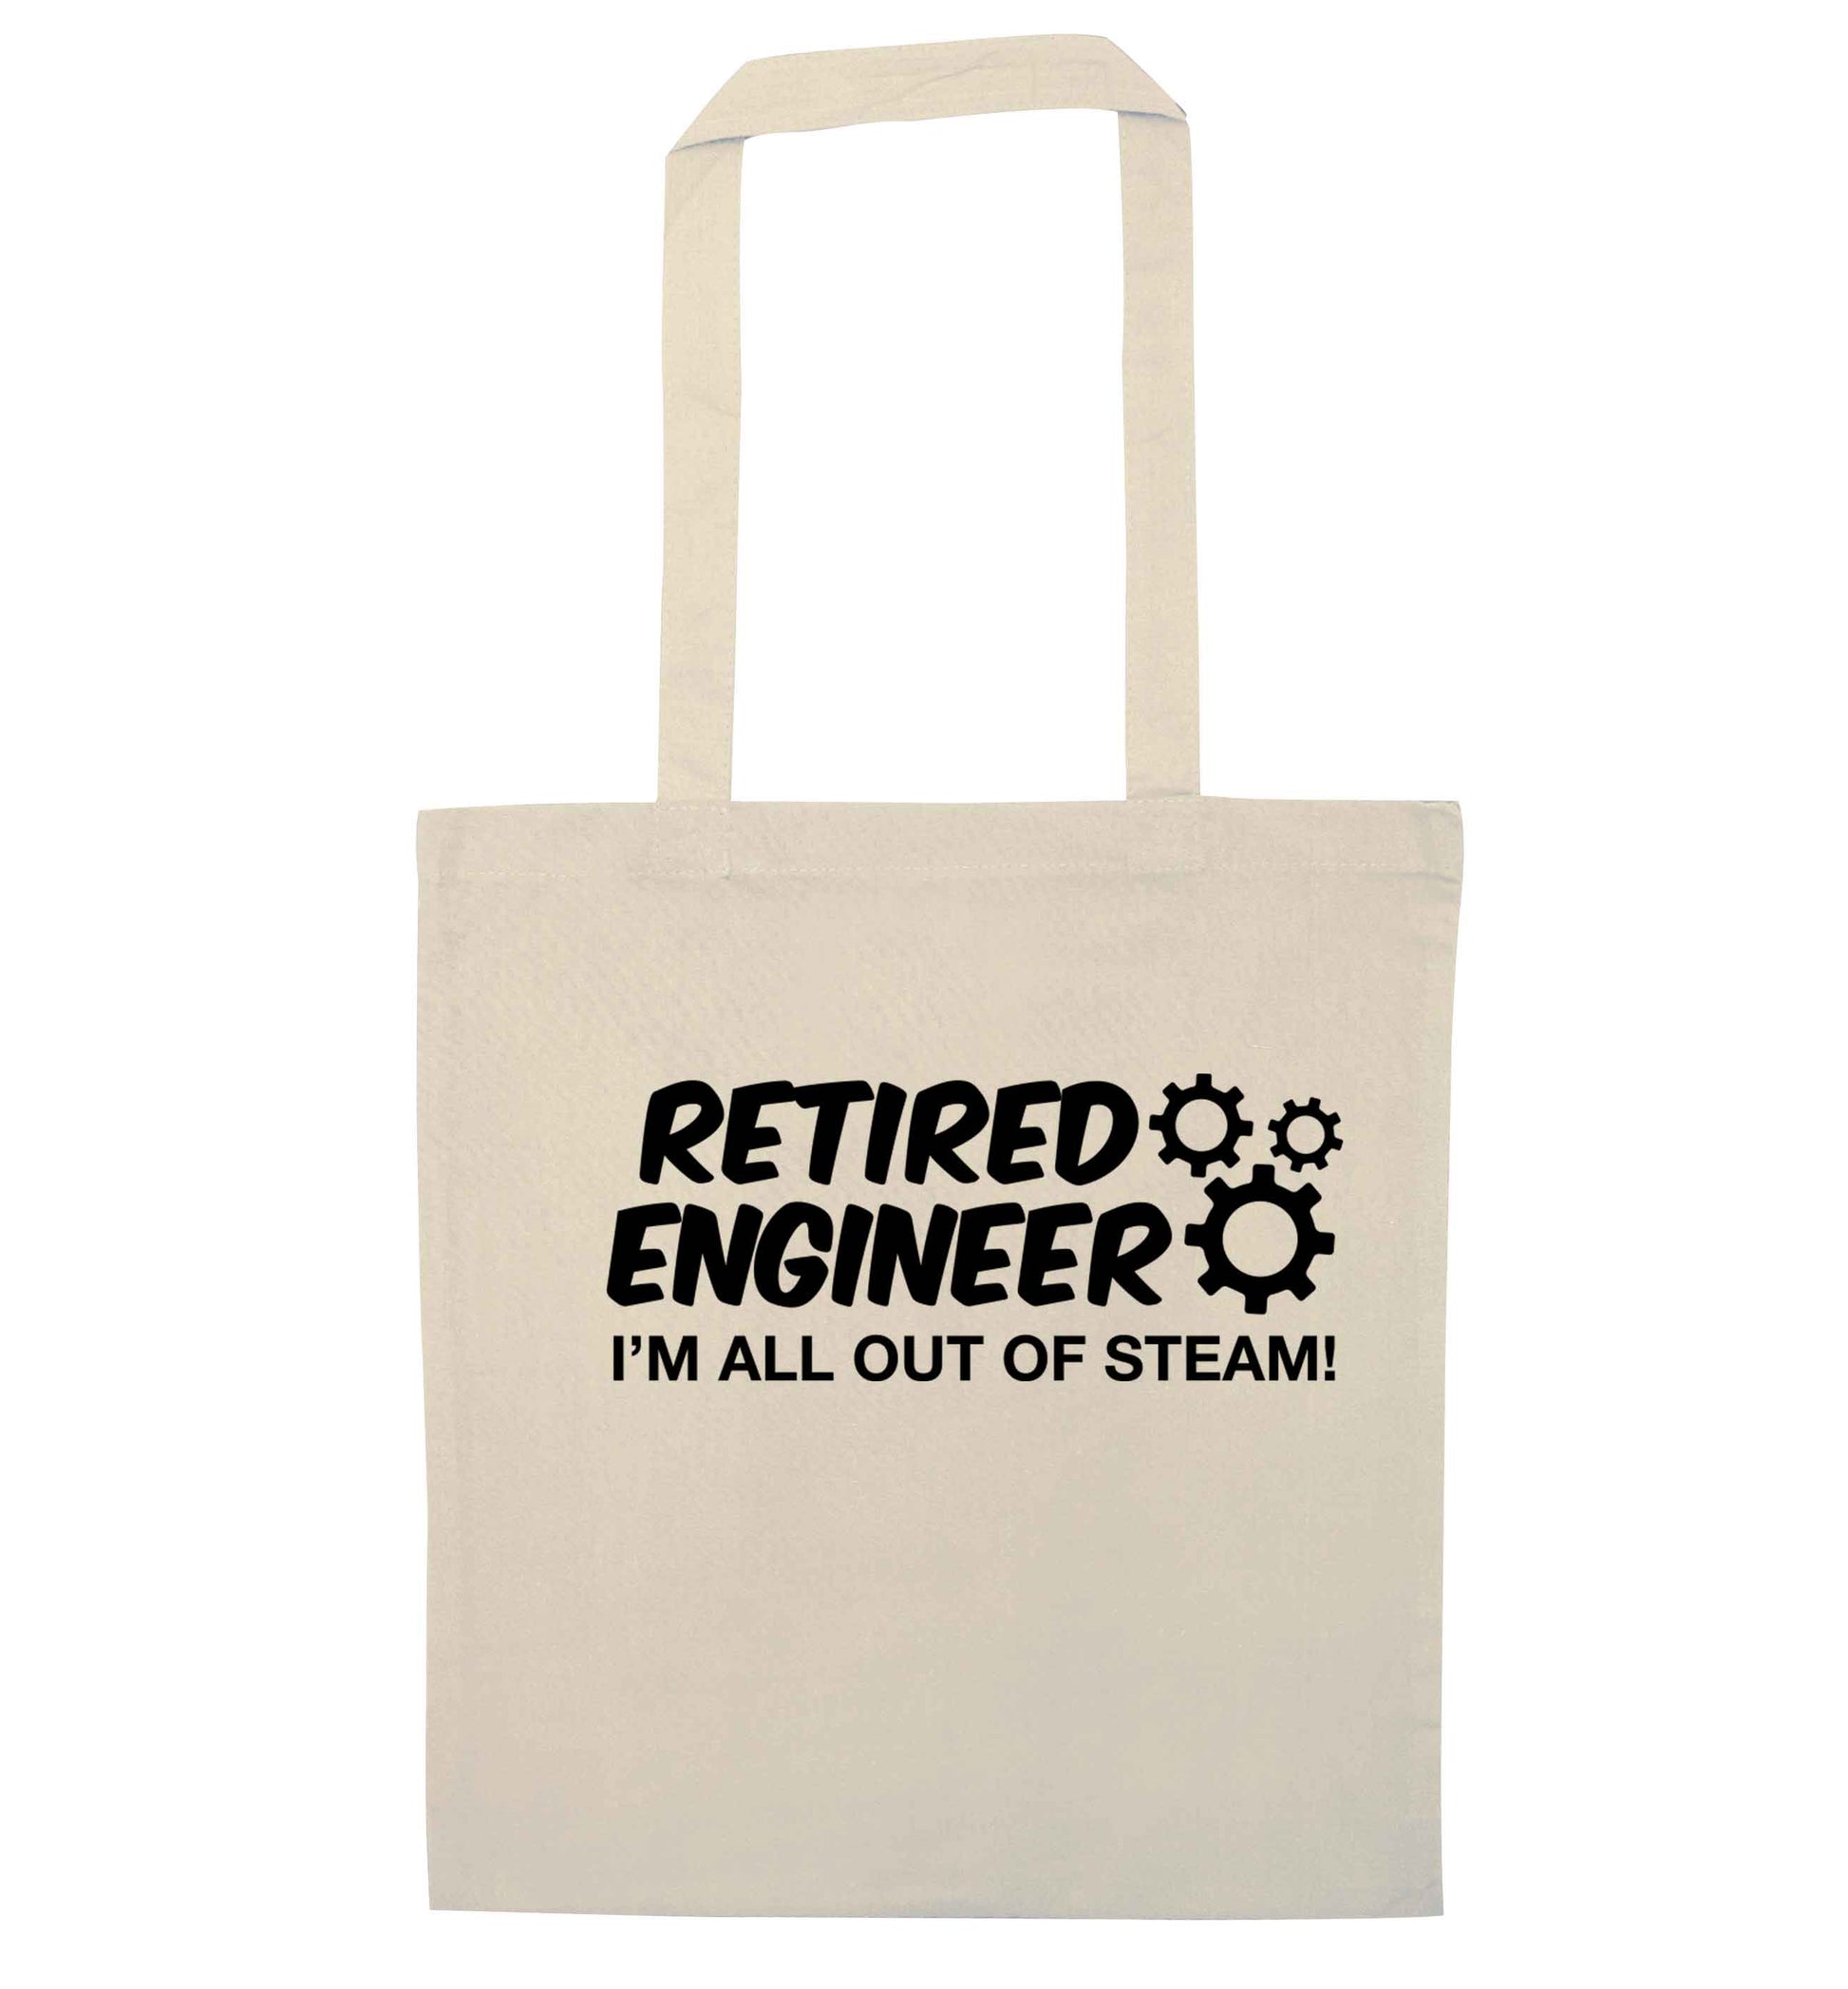 Retired engineer I'm all out of steam natural tote bag